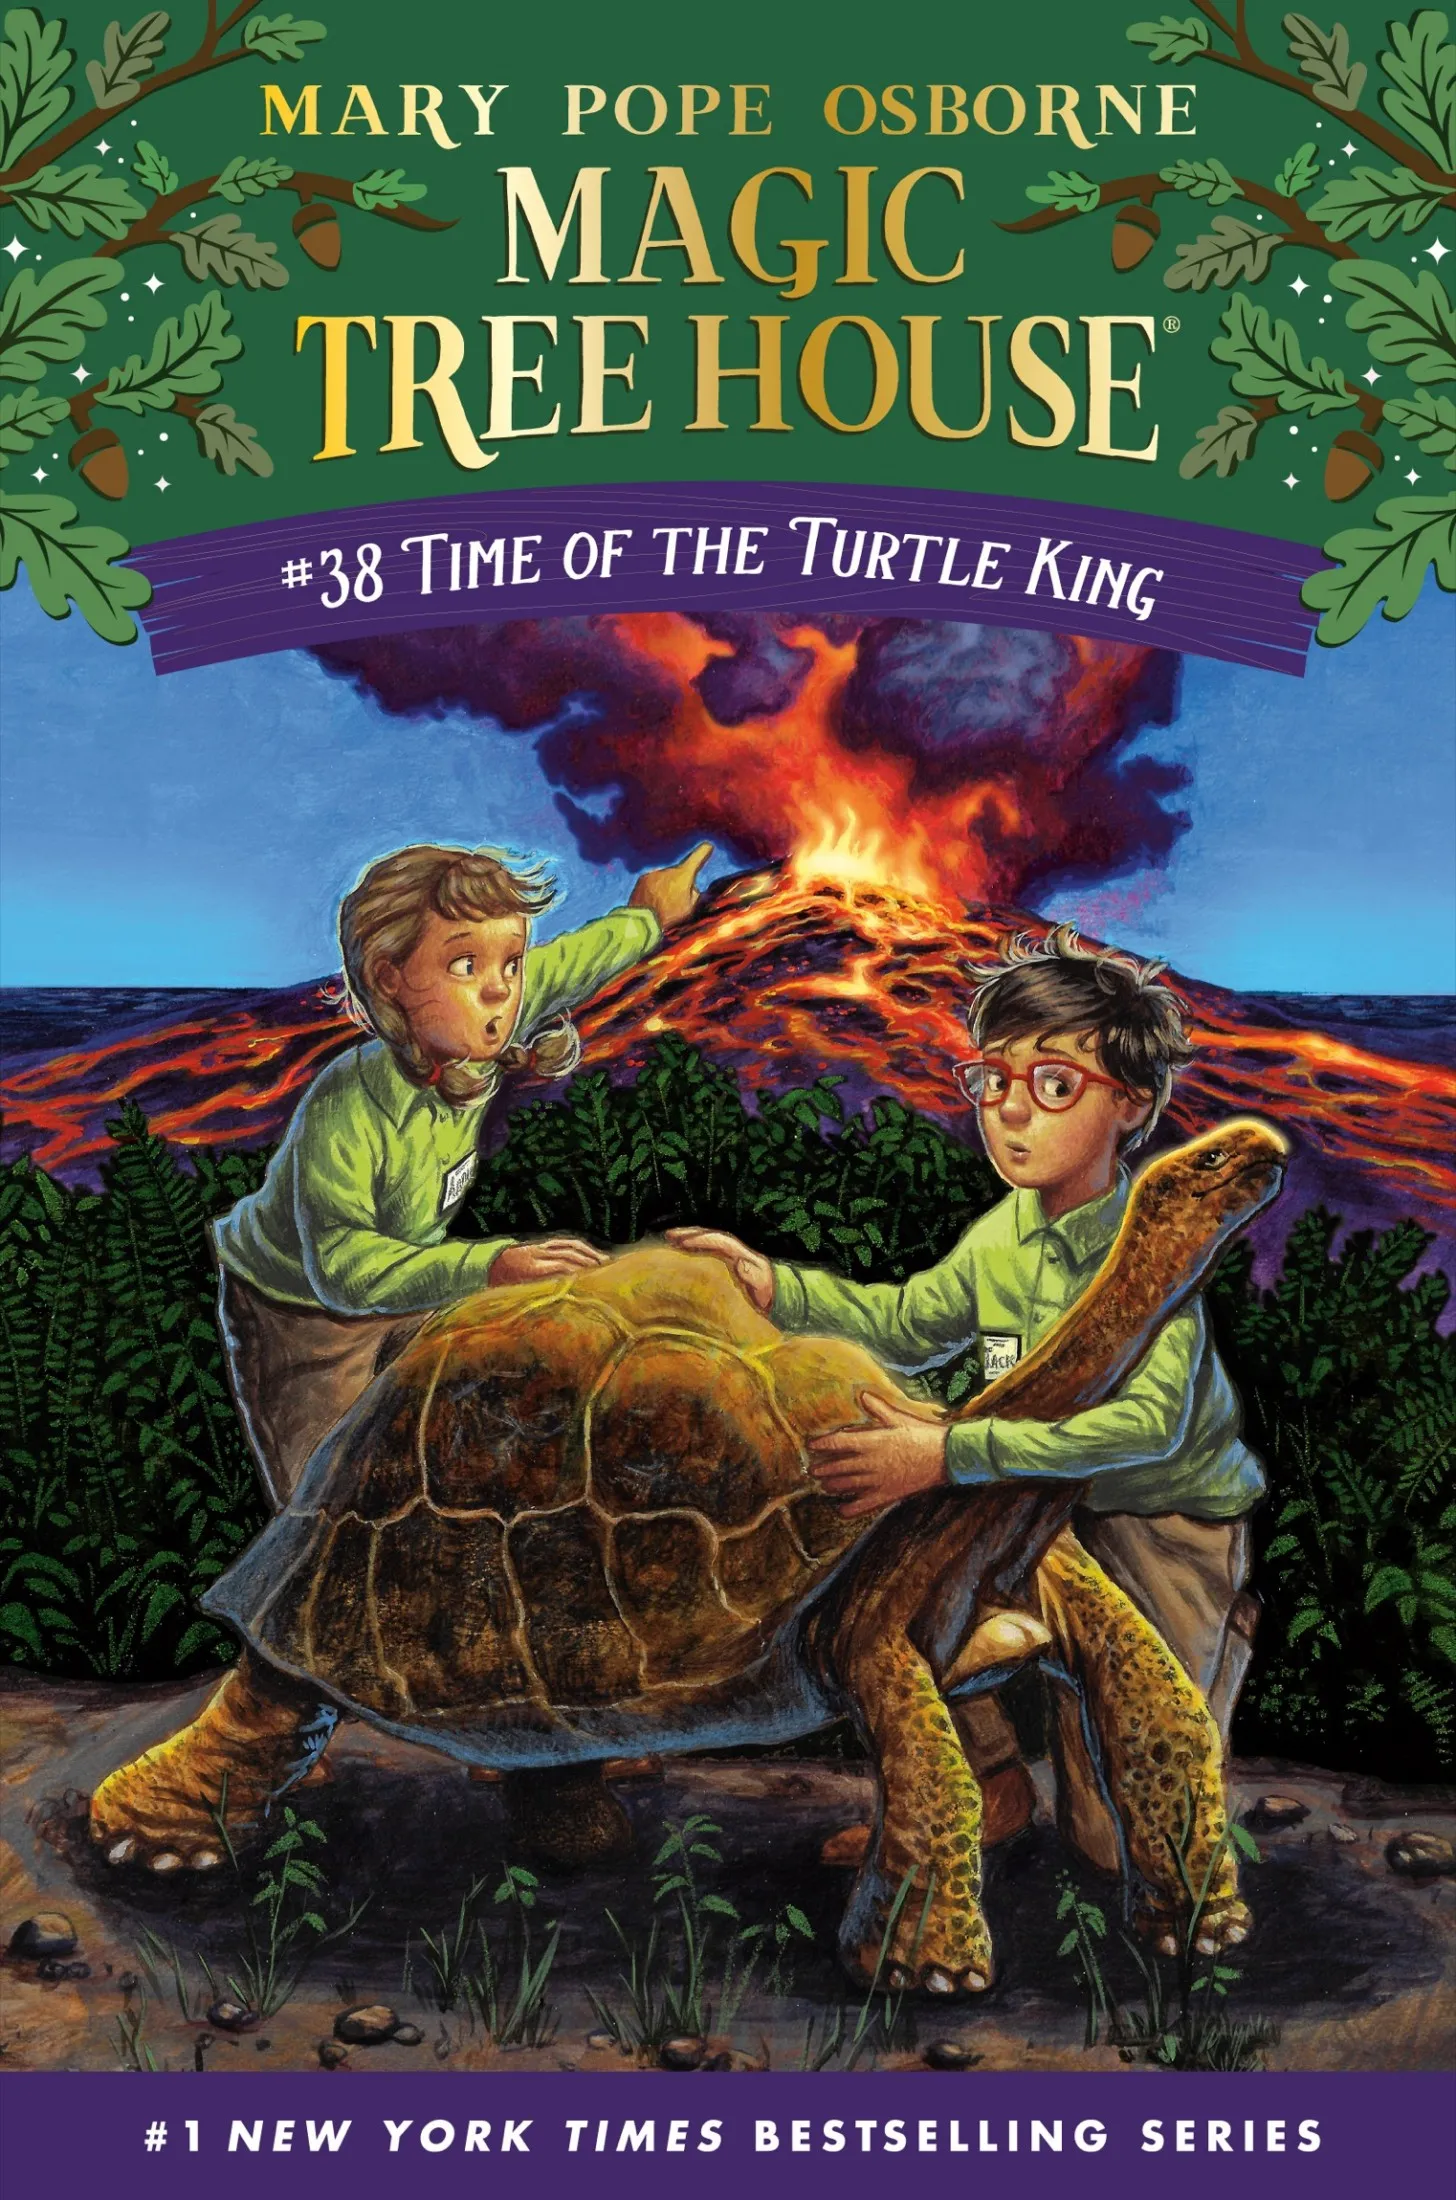 Time of the Turtle King (Magic Tree House #38)